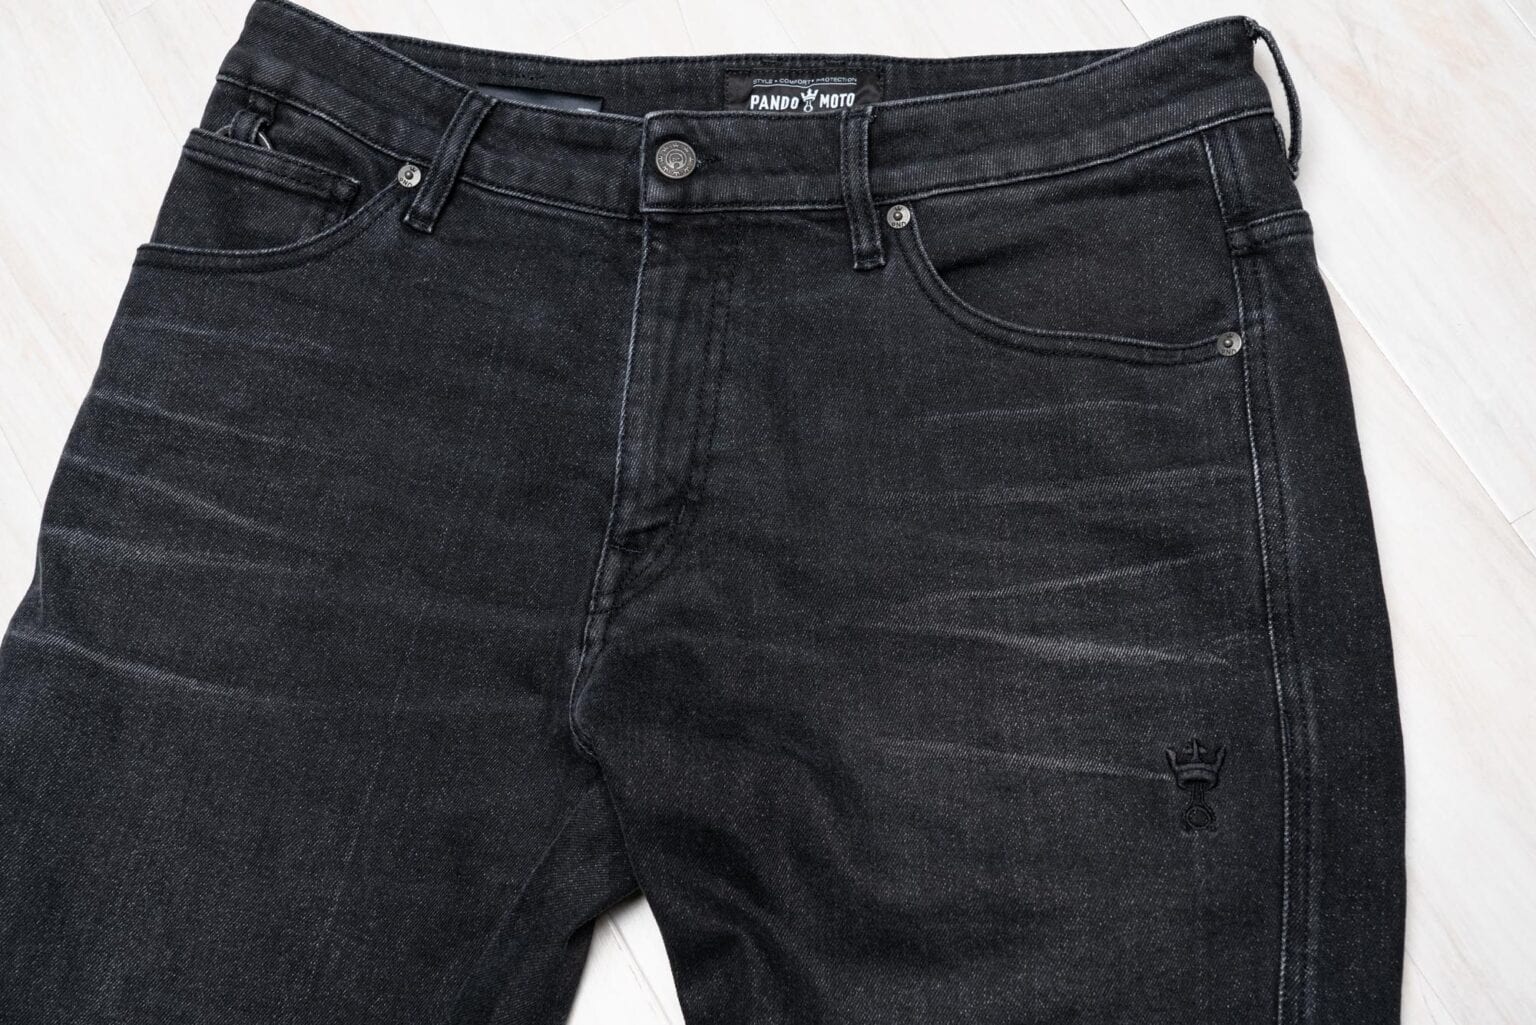 [REVIEW] Pando Moto Robby Arm Jeans - Return of the Cafe Racers